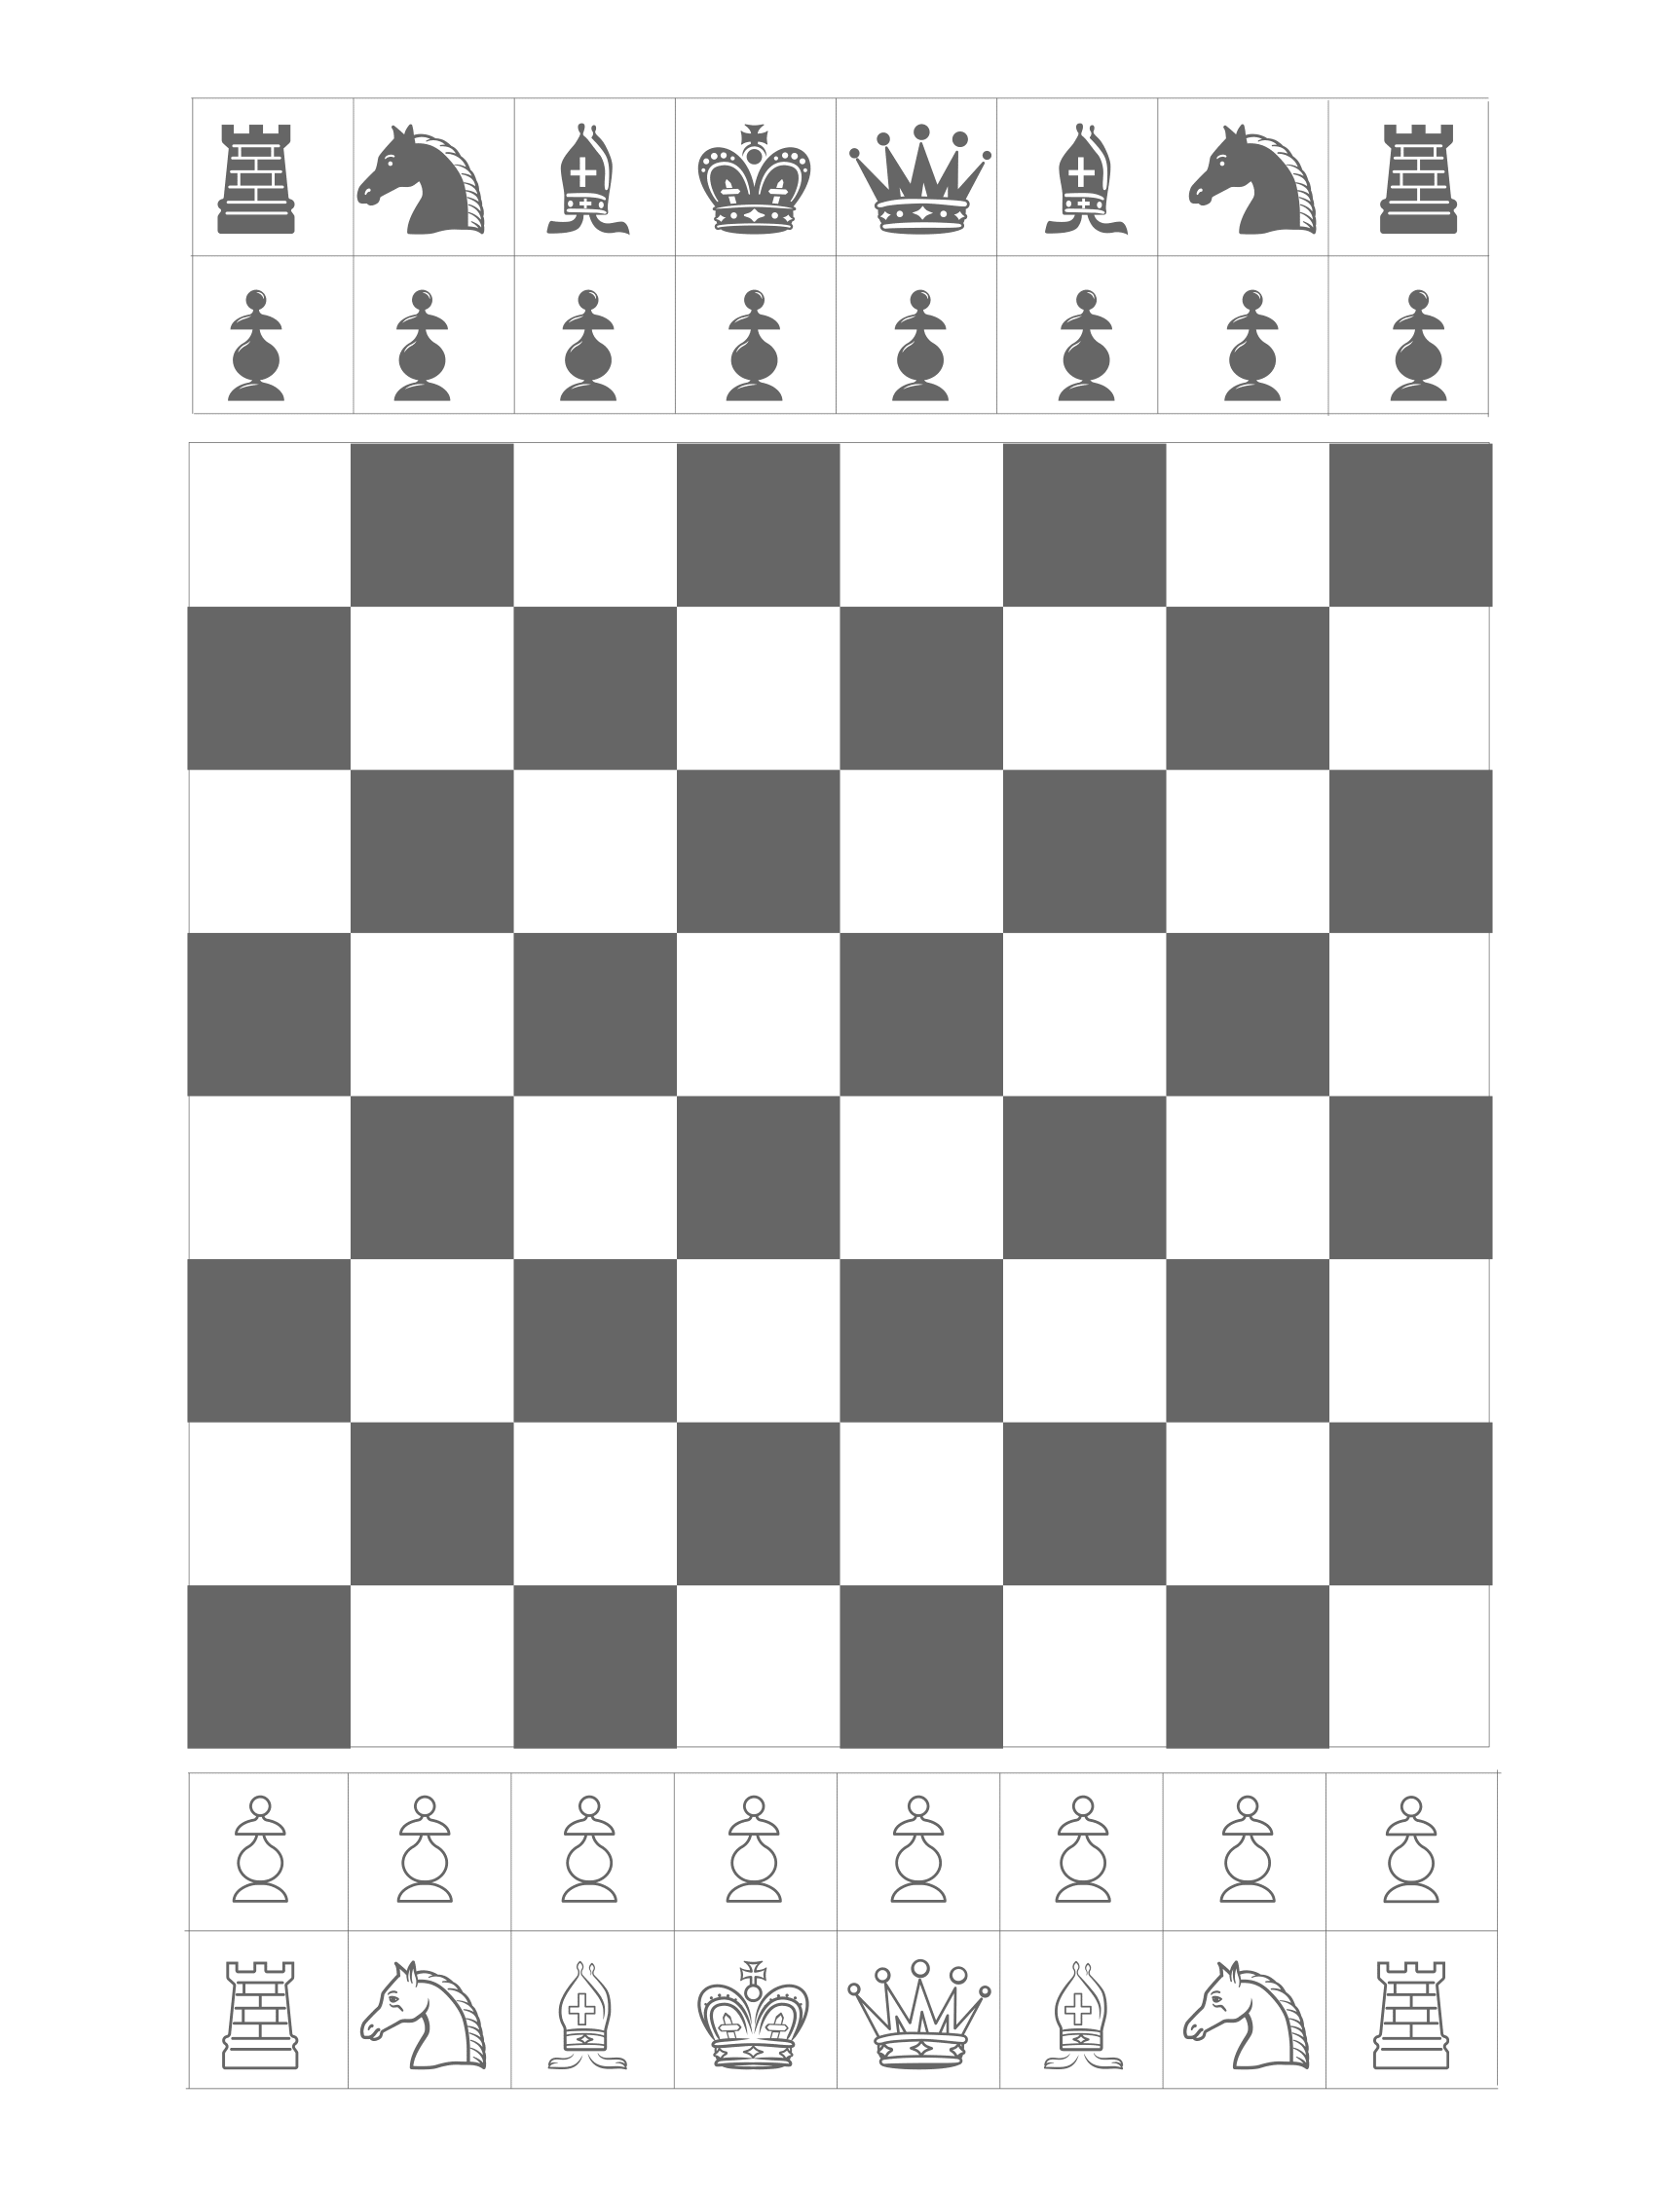 Chess Rules Printable-Freebie!  Chess puzzles, Chess rules, How to play  chess